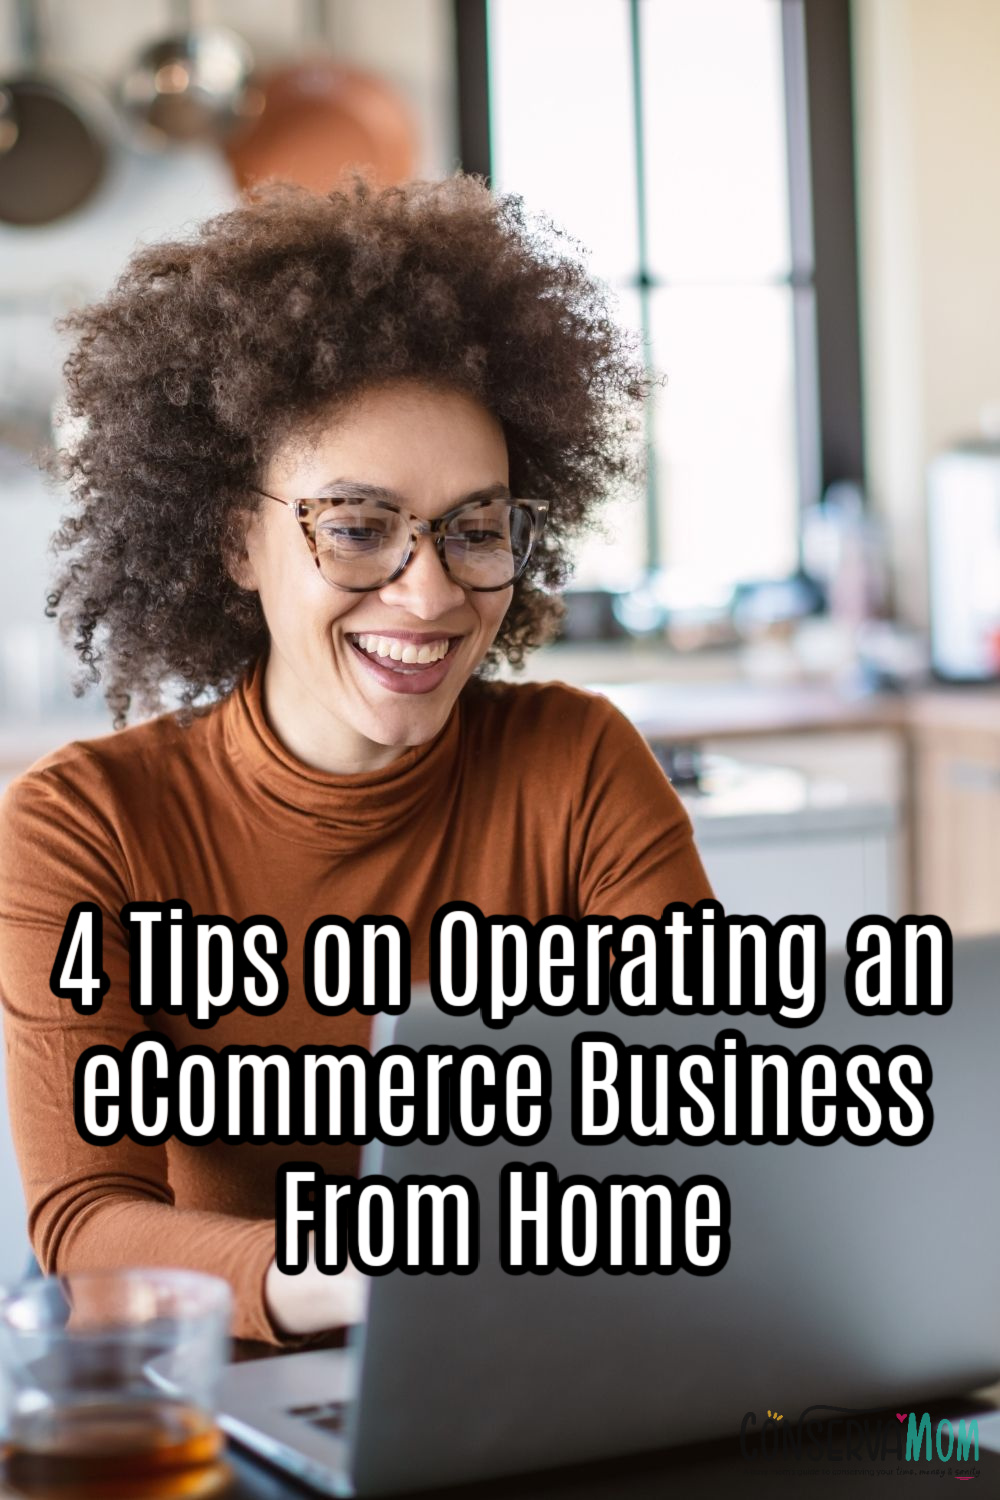 4 Tips on Operating an eCommerce Business From Home